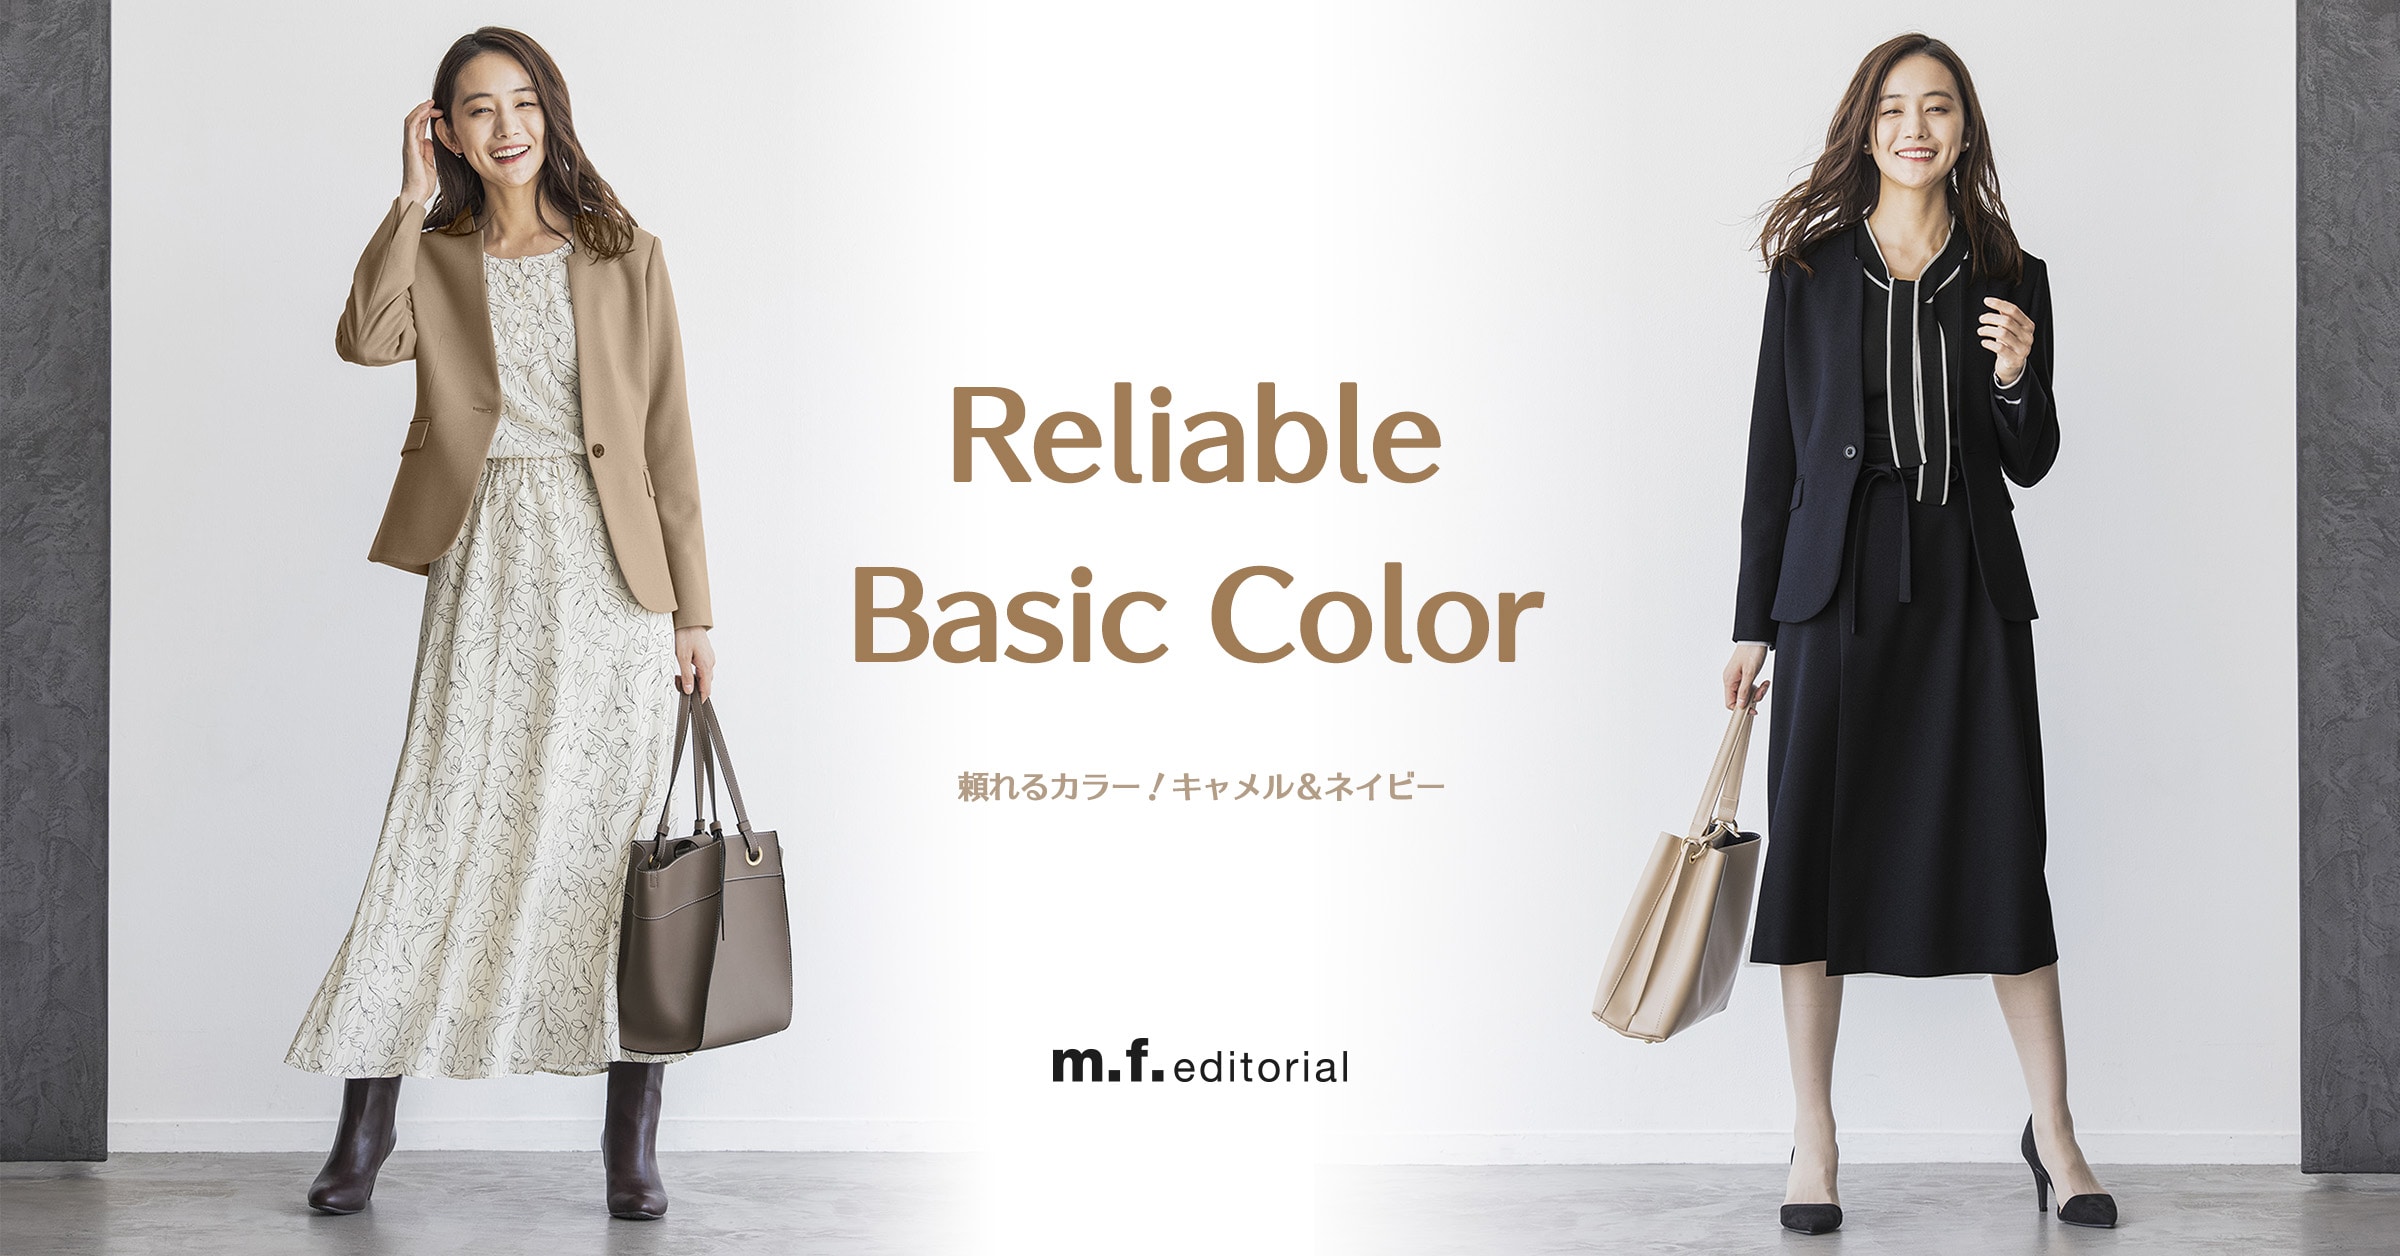 Reliable Basic Color